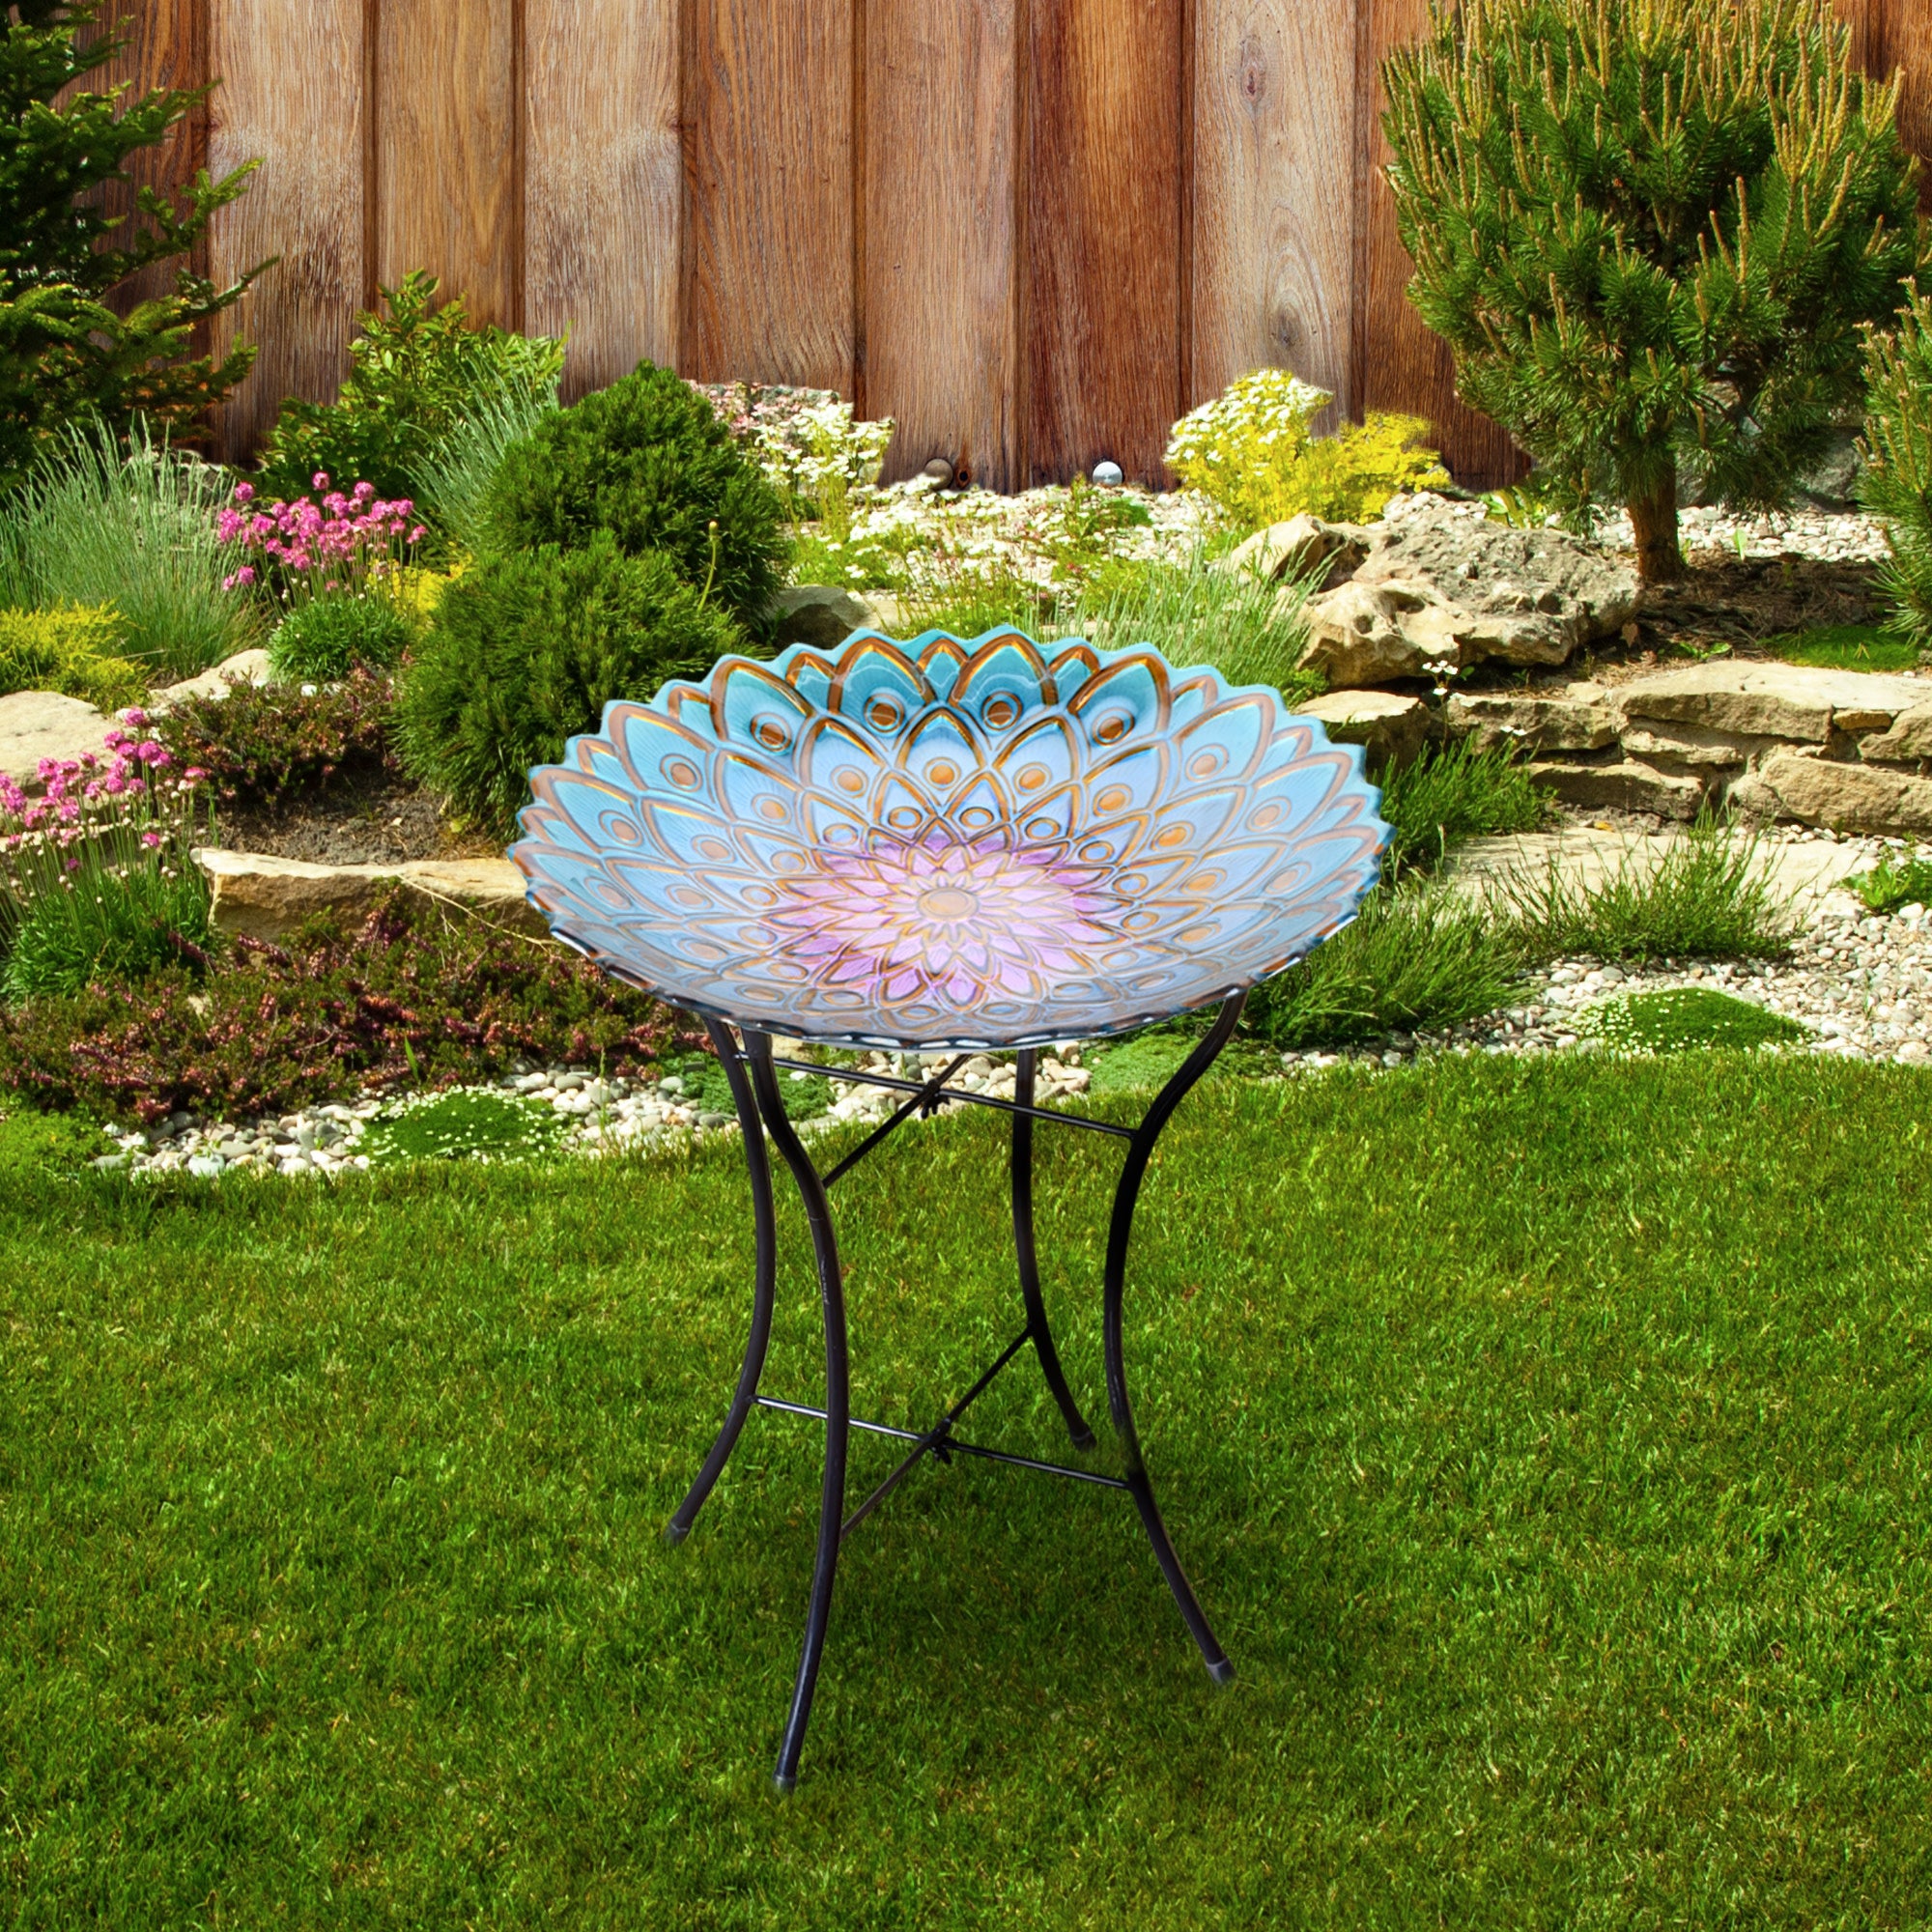 Teamson Home 18" Glass Mosaic Flower Bird Bath with Stand, Multicolor